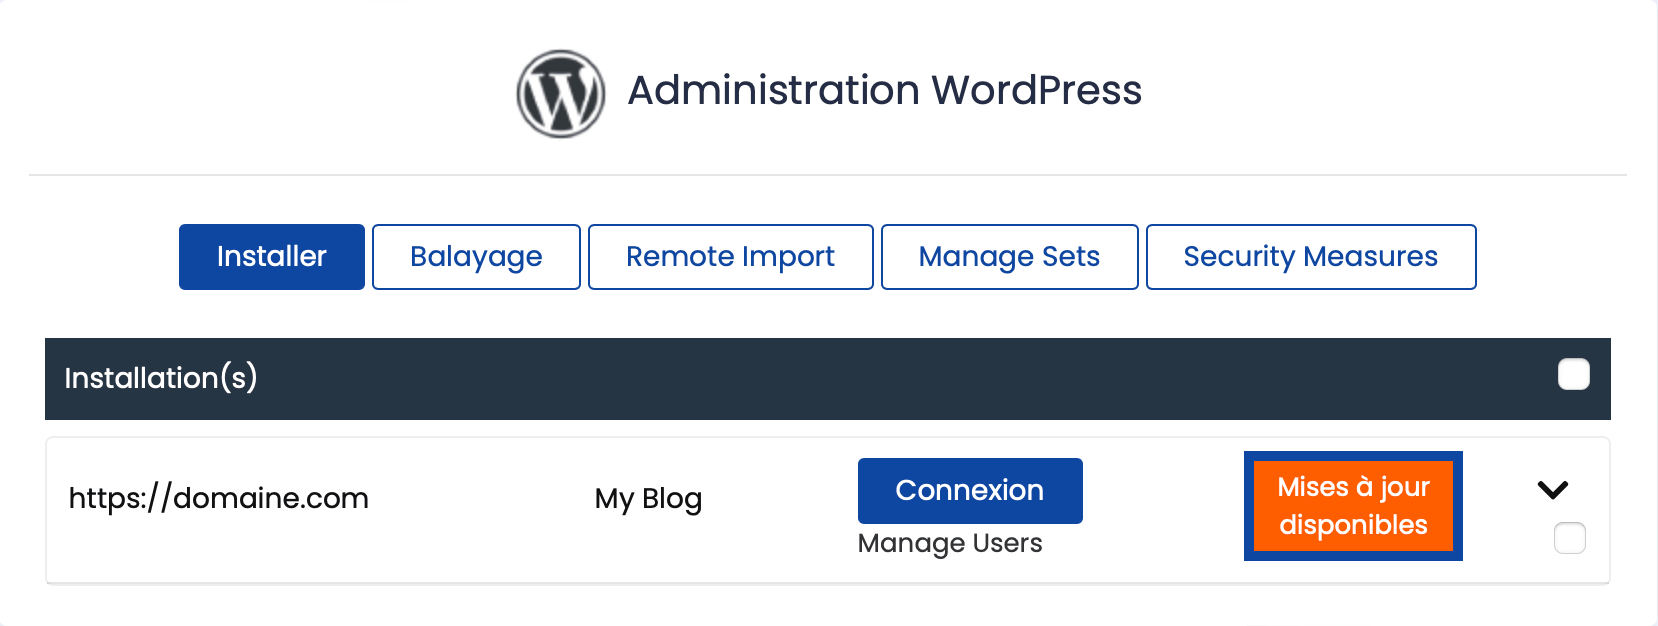 cpanel-wordpress-manager-mise-a-jour-disponible.png